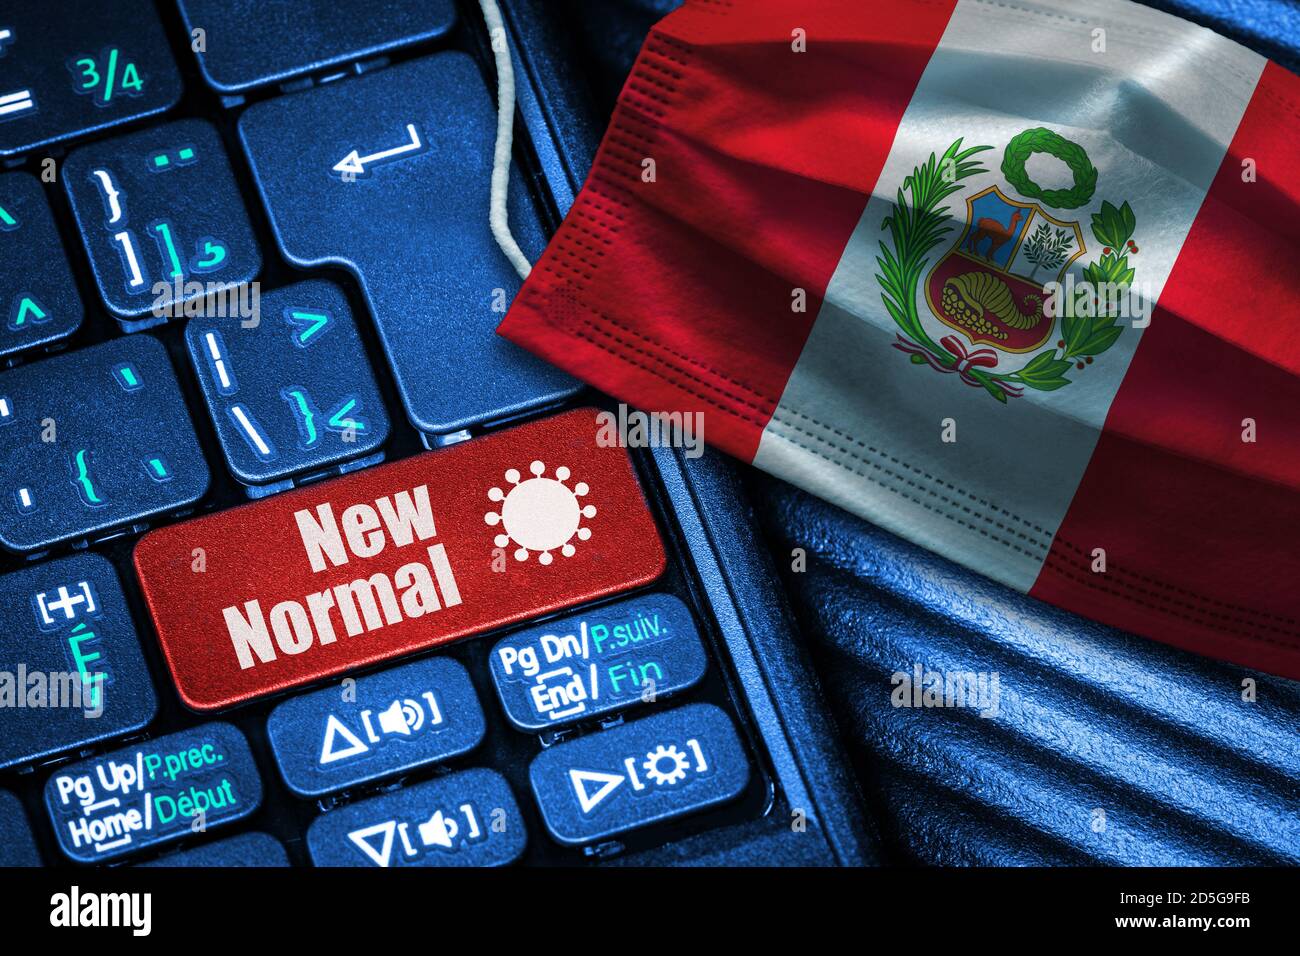 Concept of New Normal in Peru during Covid-19 with computer keyboard red button text and face mask showing Peruvian Flag. Stock Photo